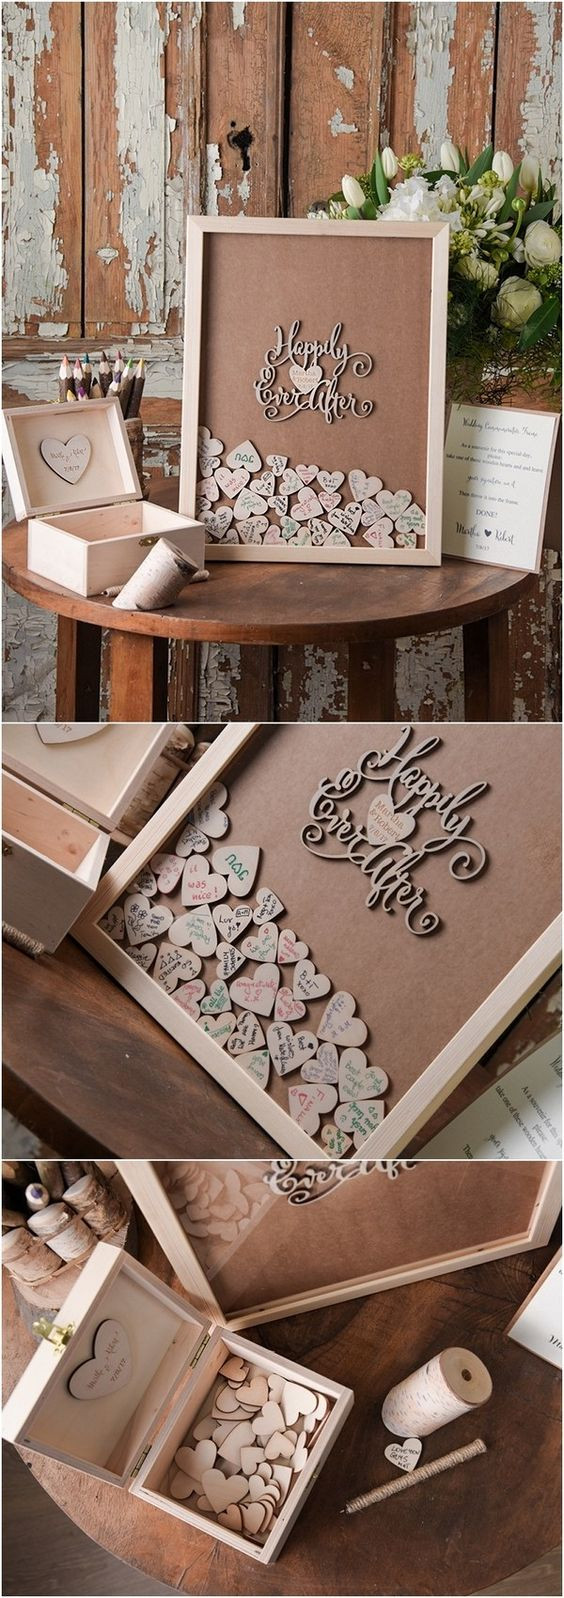 Unique Guest Book Ideas For Wedding
 22 of Our Favorite Unique Wedding Guest Book Ideas Page 2